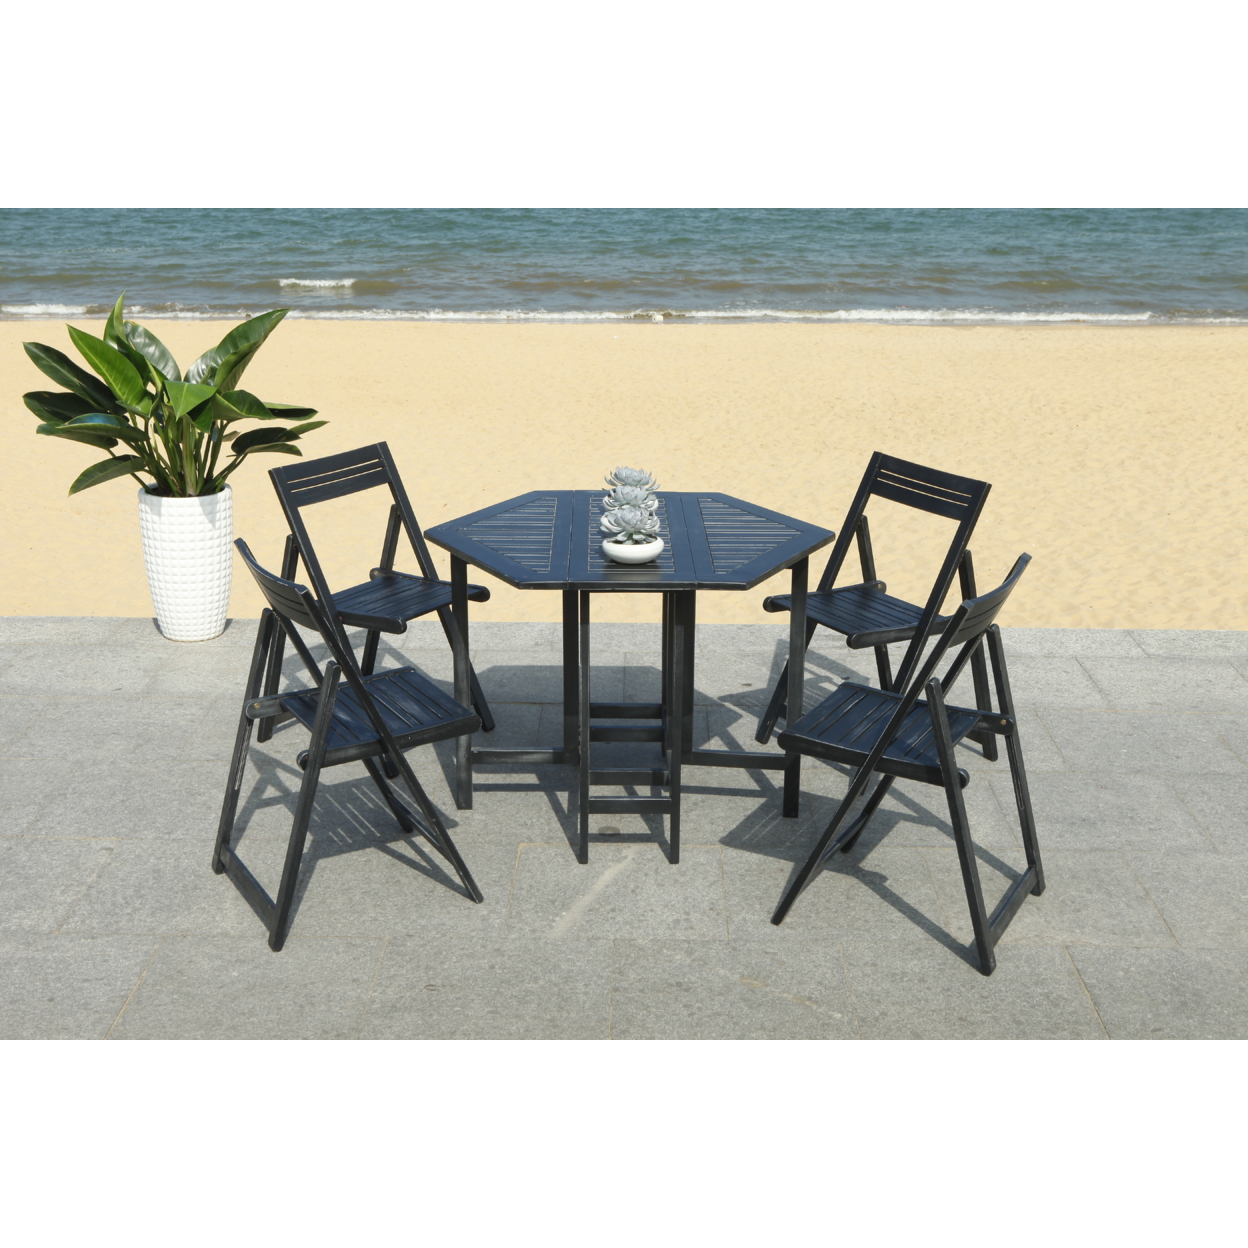 SAFAVIEH Outdoor Collection Kerman Table & 4 Chairs Black